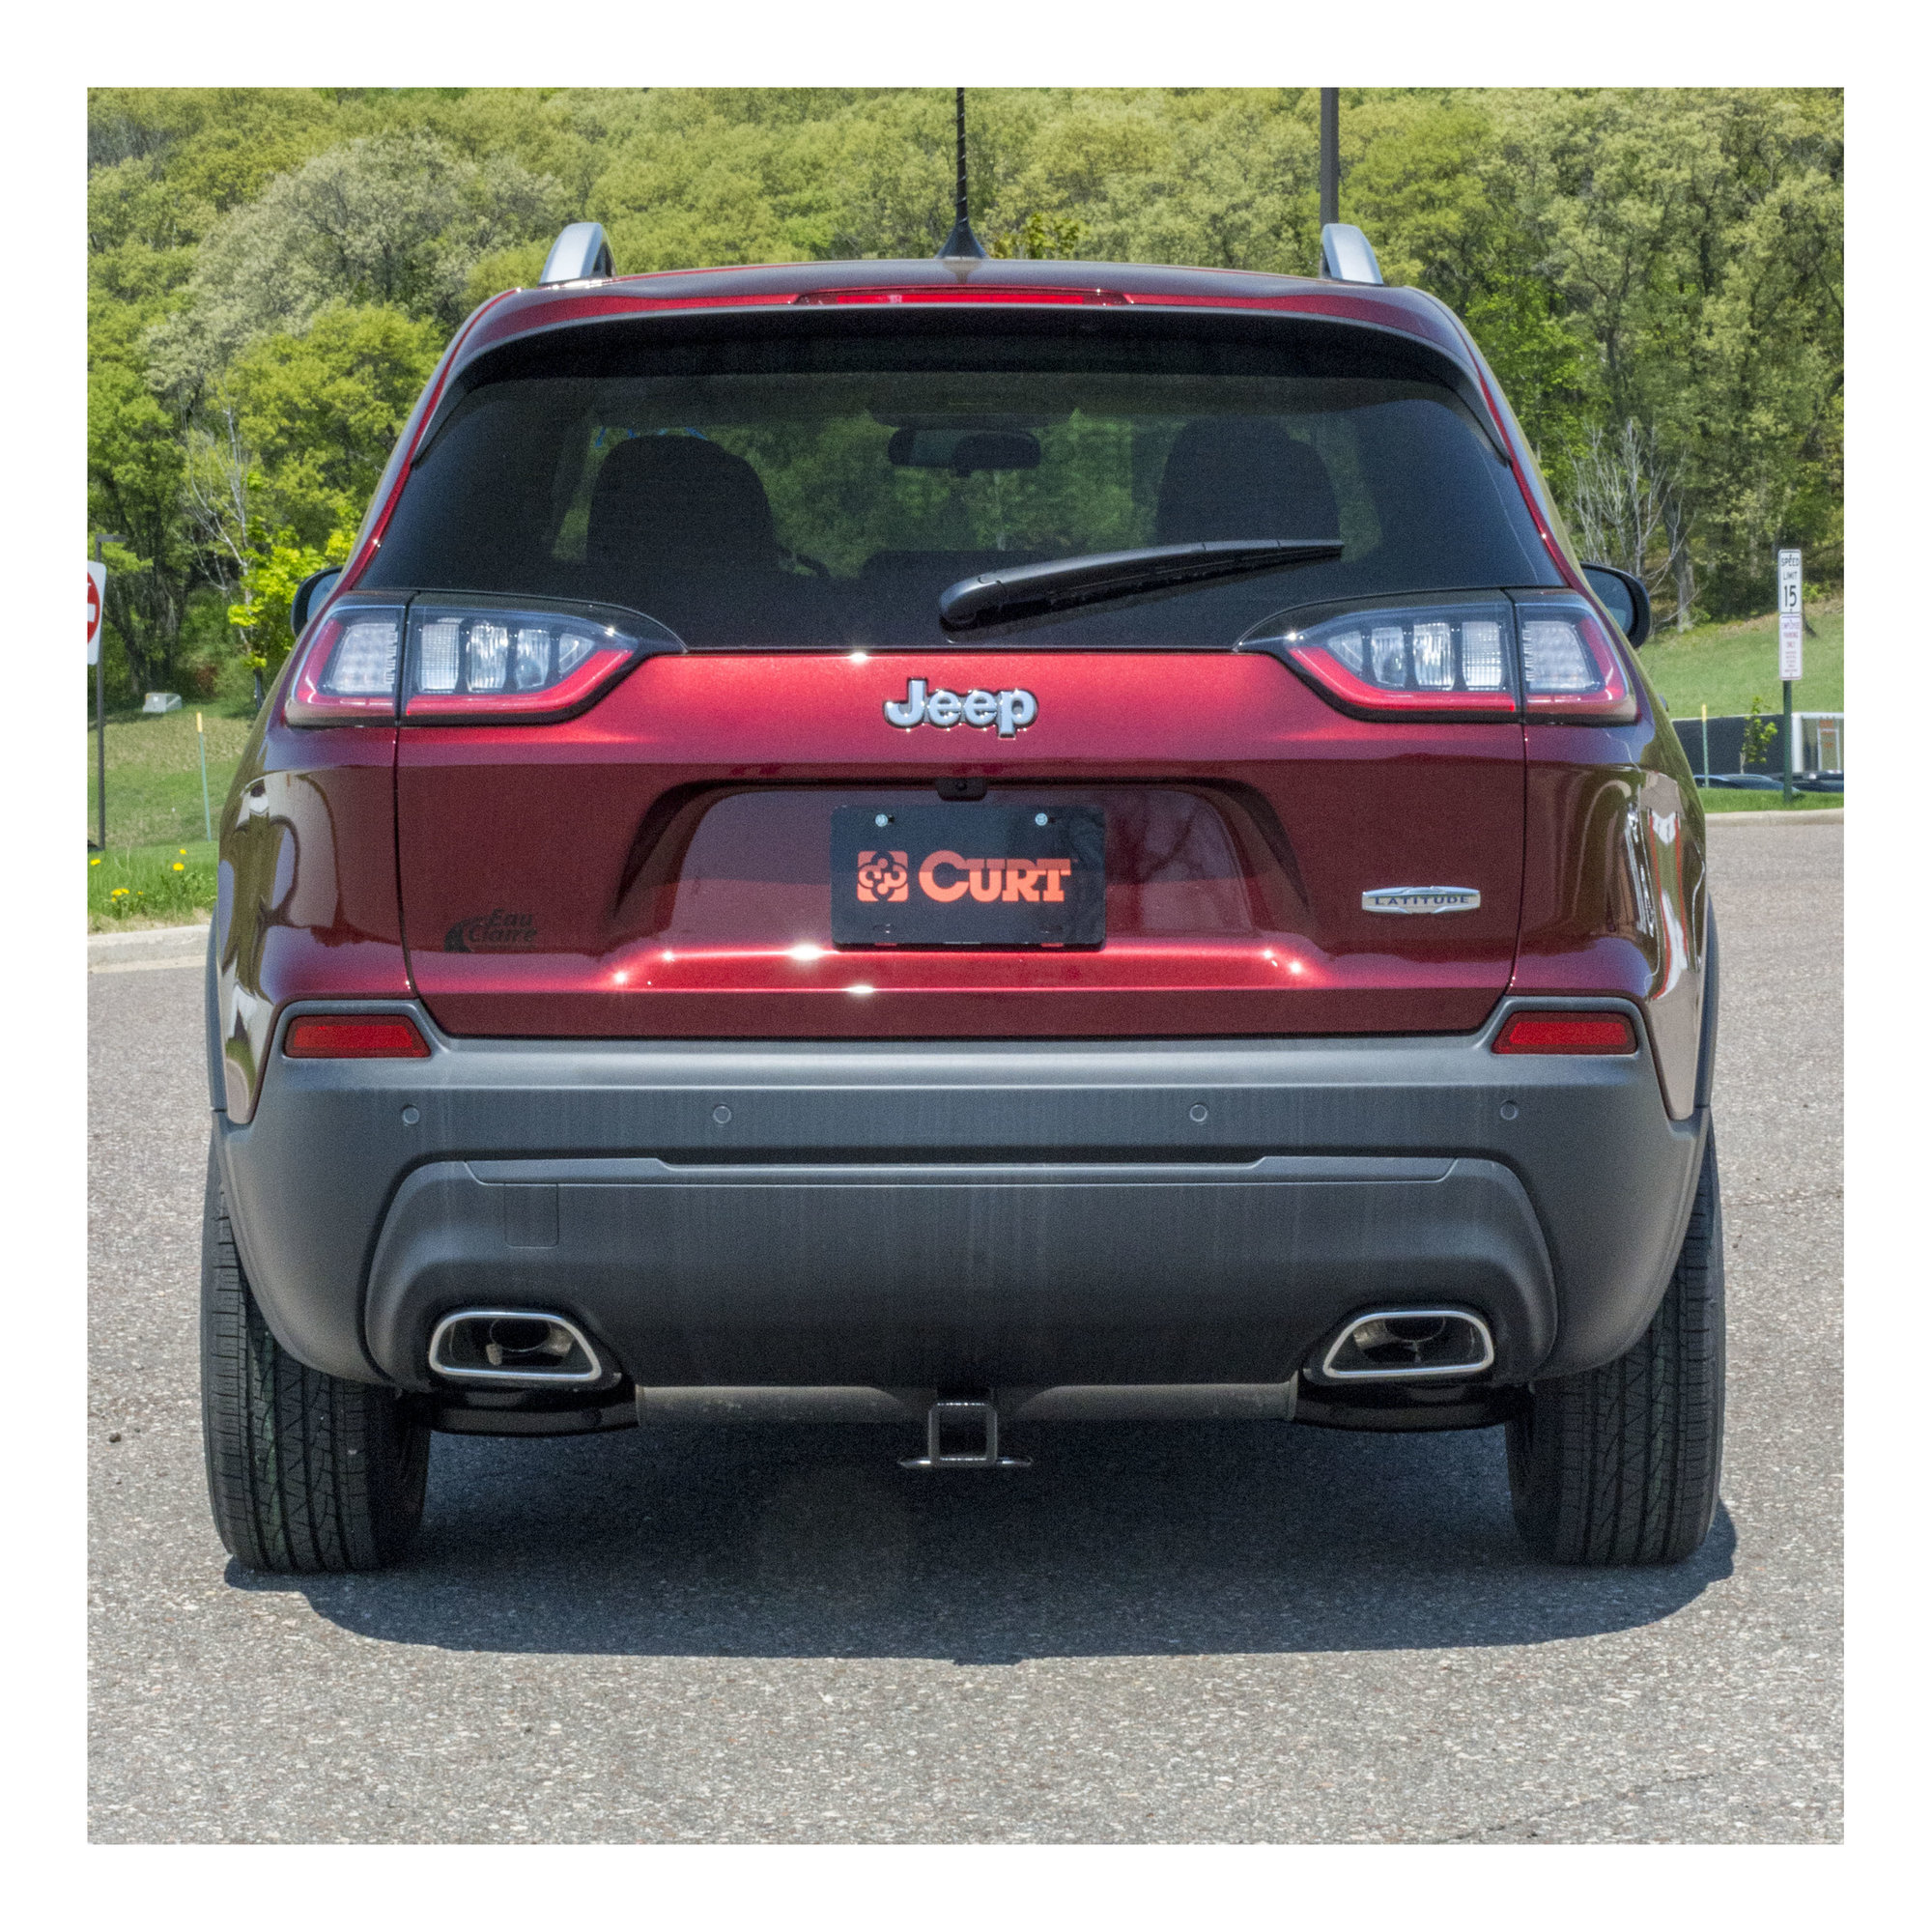 CURT Class III Trailer Hitch with 2" Receiver for 2019 Jeep Cherokee KL | Quadratec Trailer Hitch For 2019 Jeep Cherokee Latitude